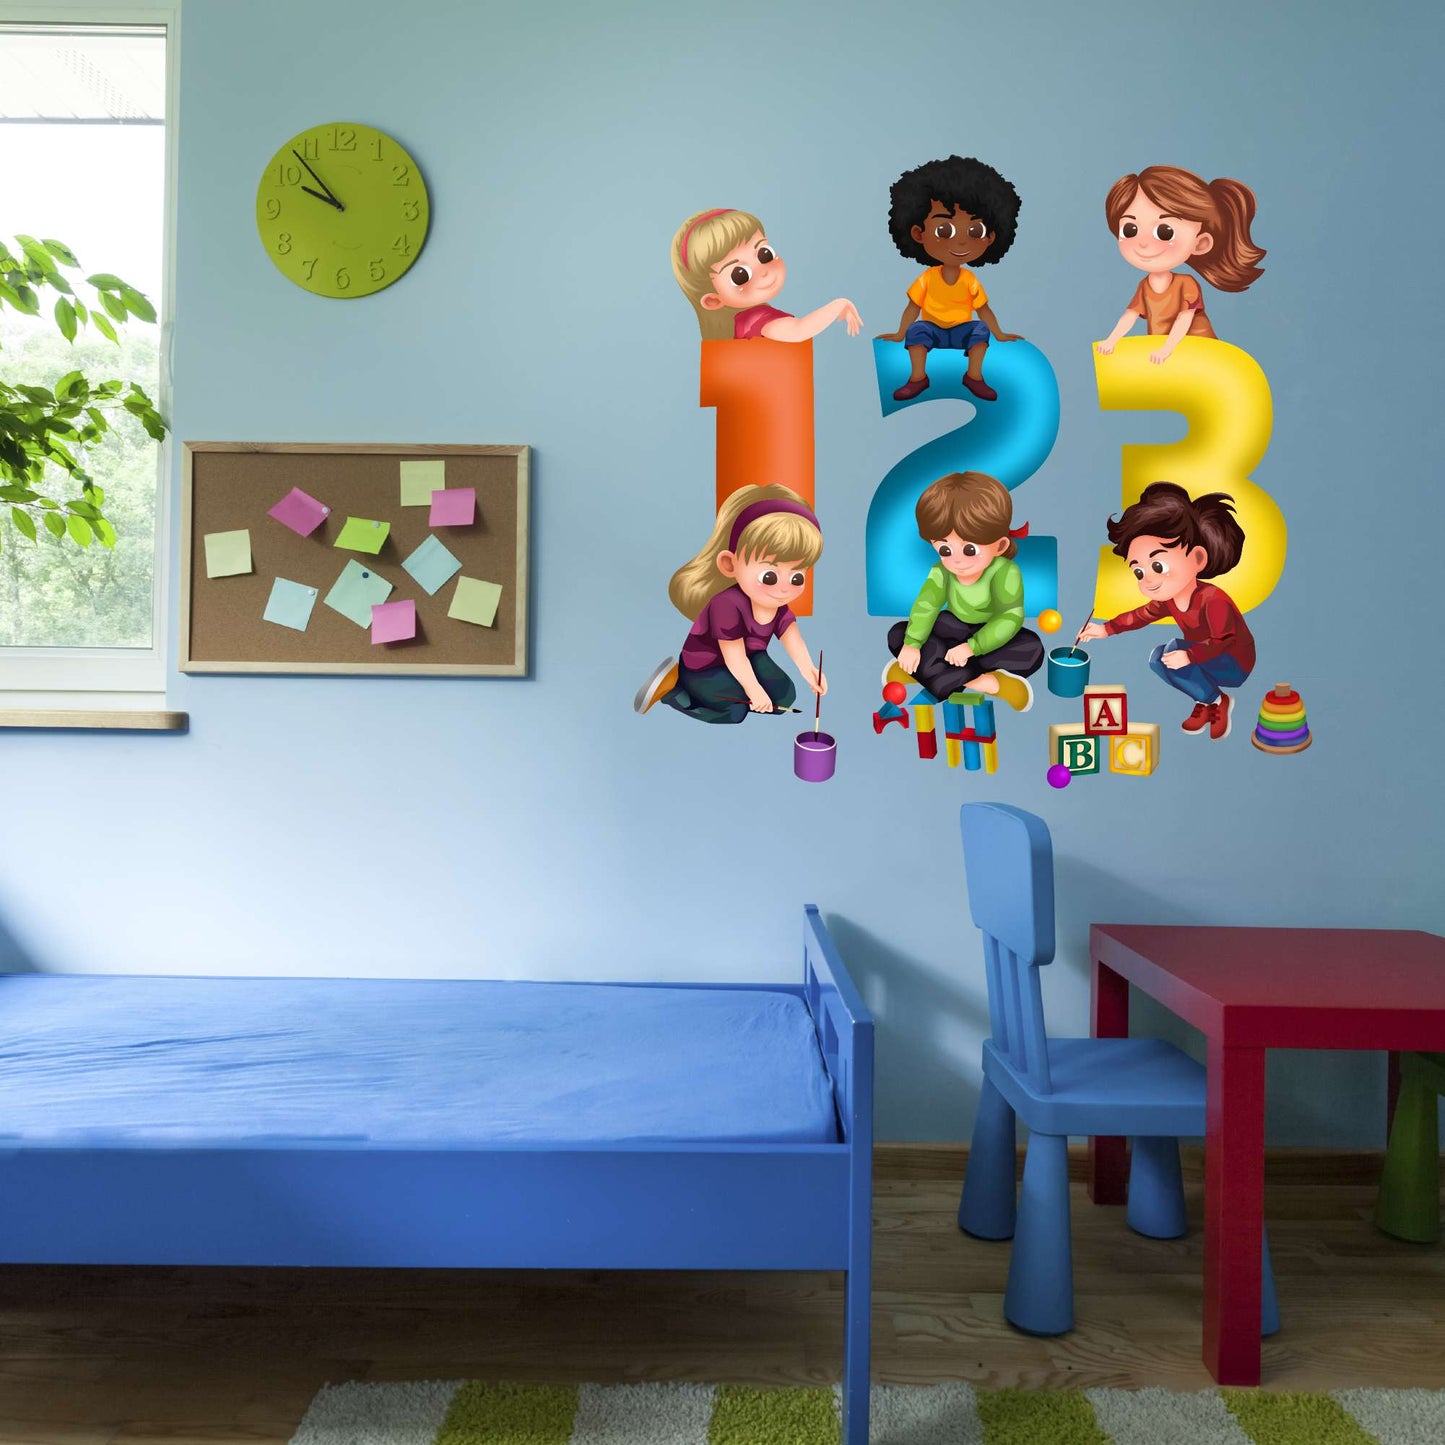 Design With Vinyl Playful Kids Wall Decal 123 Cute Children Playing Colorful Numbers Design